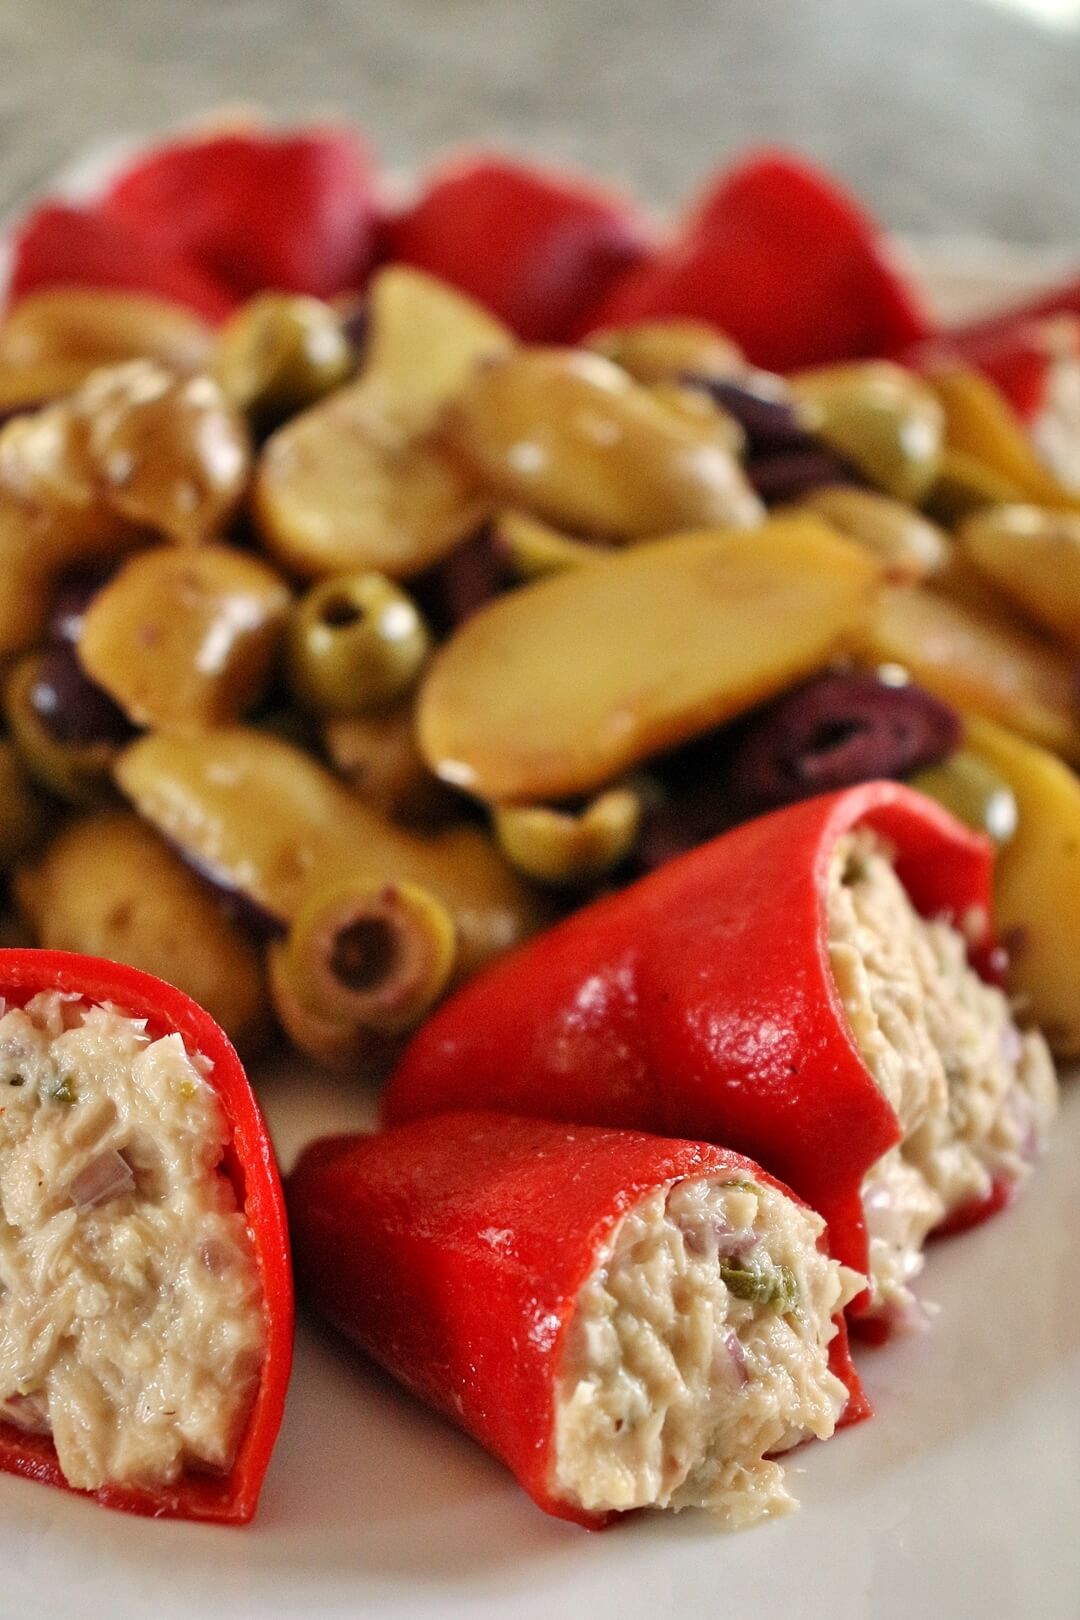 Close up of 3 piquillo peppers stuffed with tuna salad, with potato and olive salad